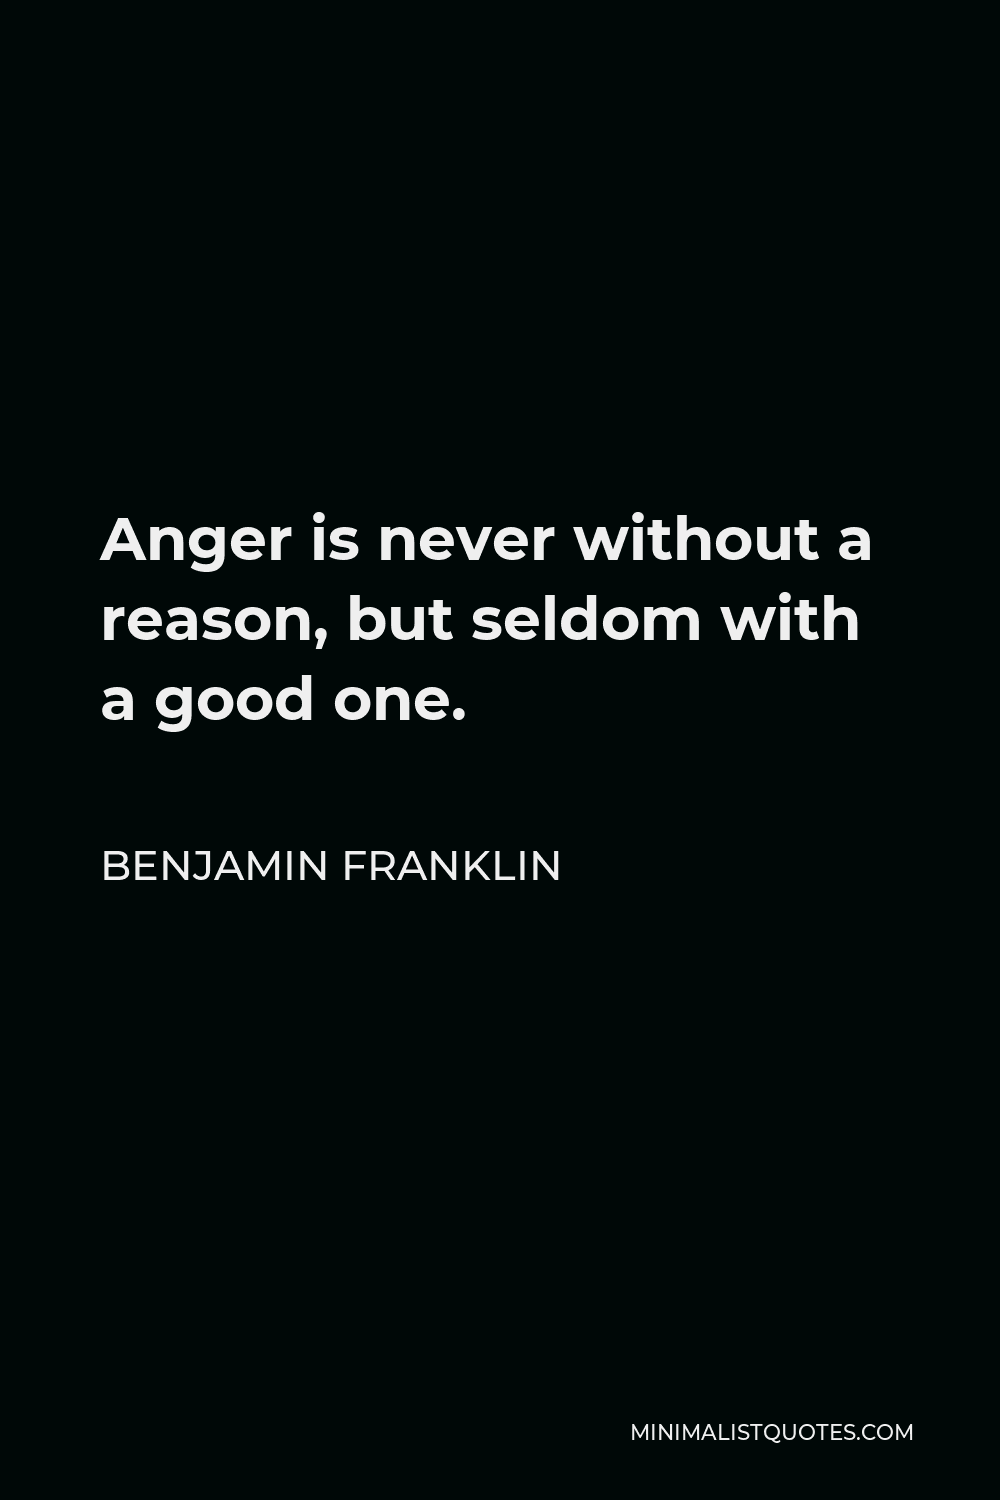 Benjamin Franklin Quote - Anger is never without a reason, but seldom with a good one.